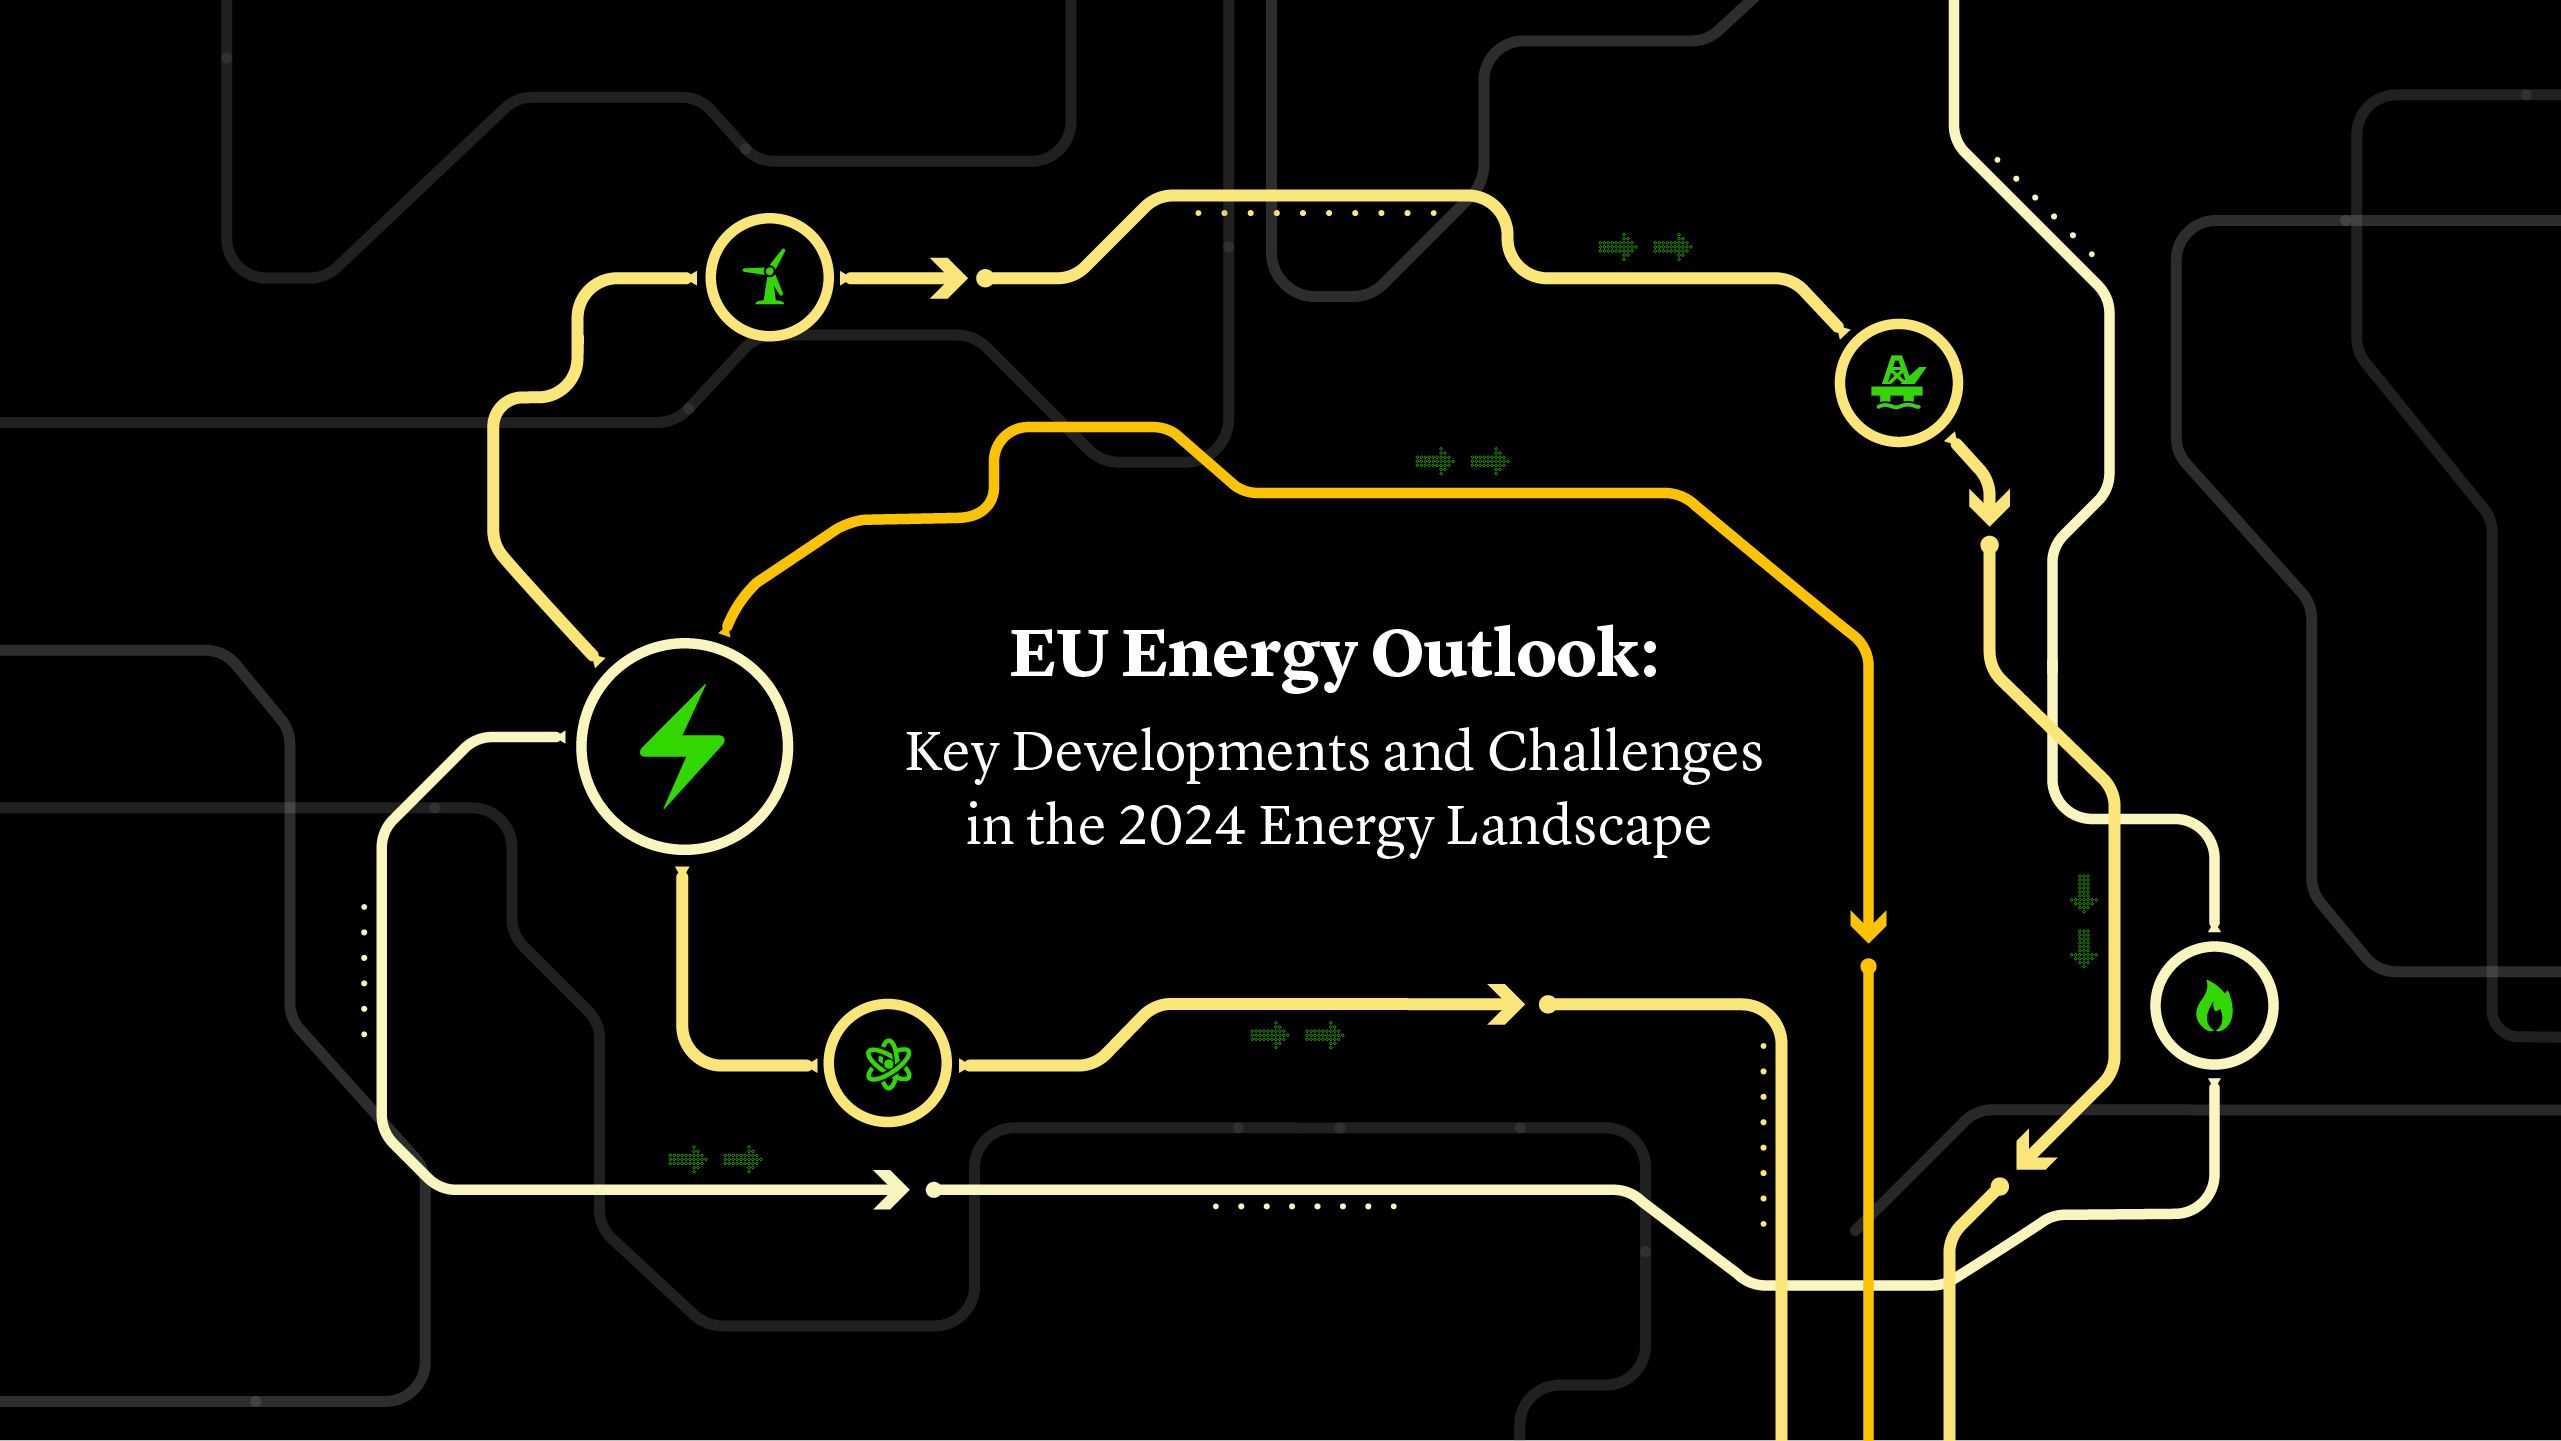 EU Energy Outlook: Key Developments and Challenges in the 2024 Energy Landscape